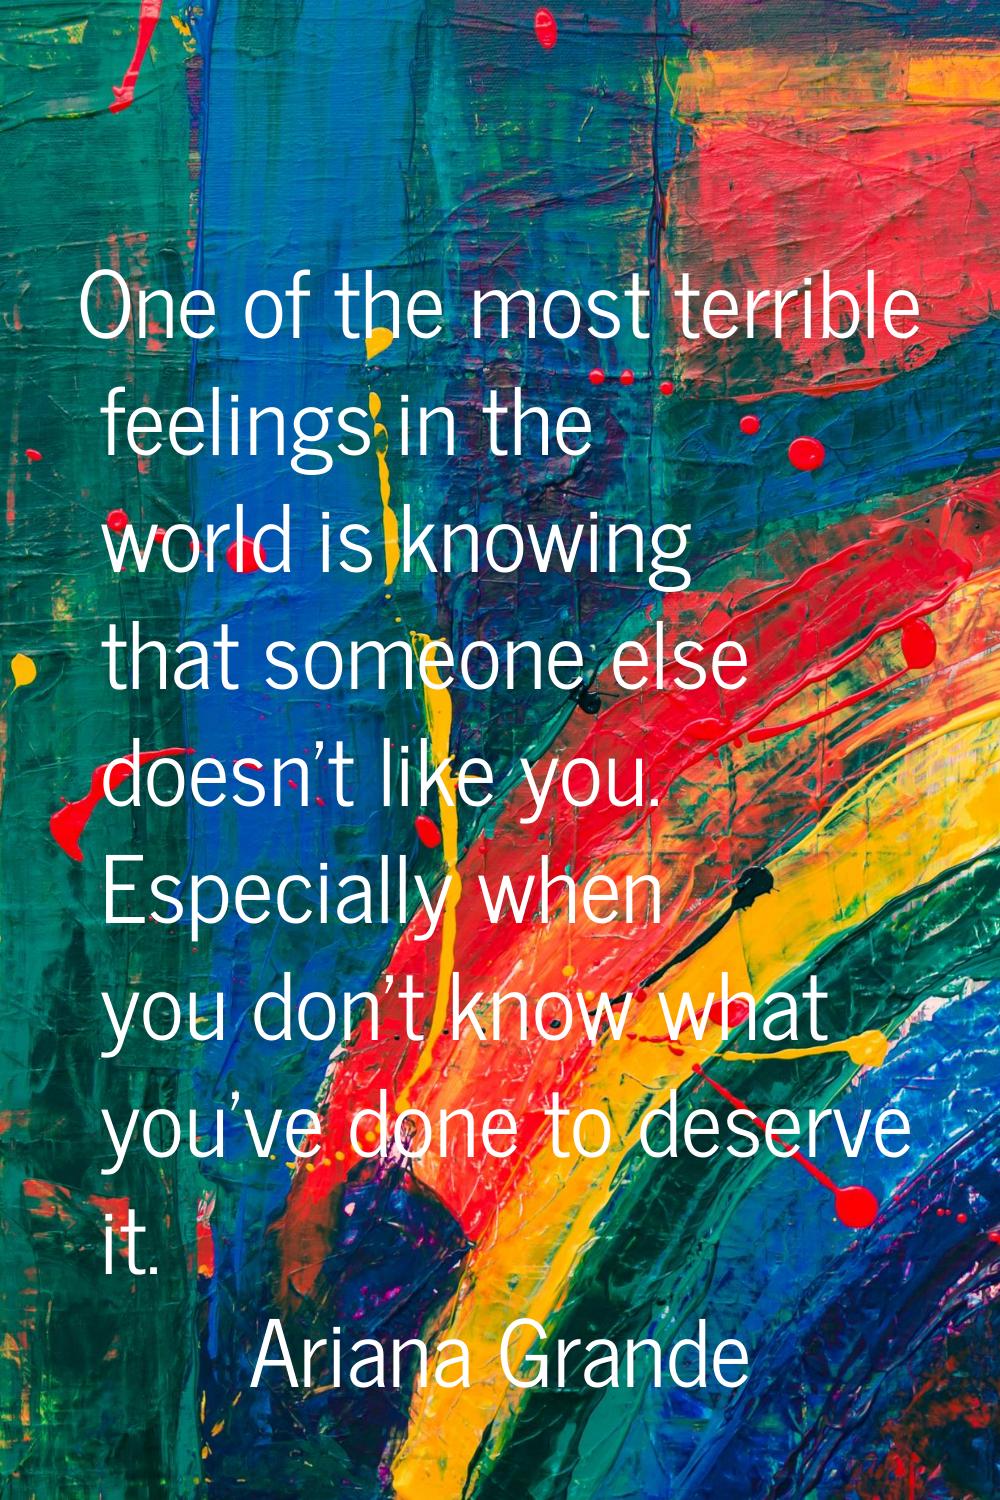 One of the most terrible feelings in the world is knowing that someone else doesn't like you. Espec